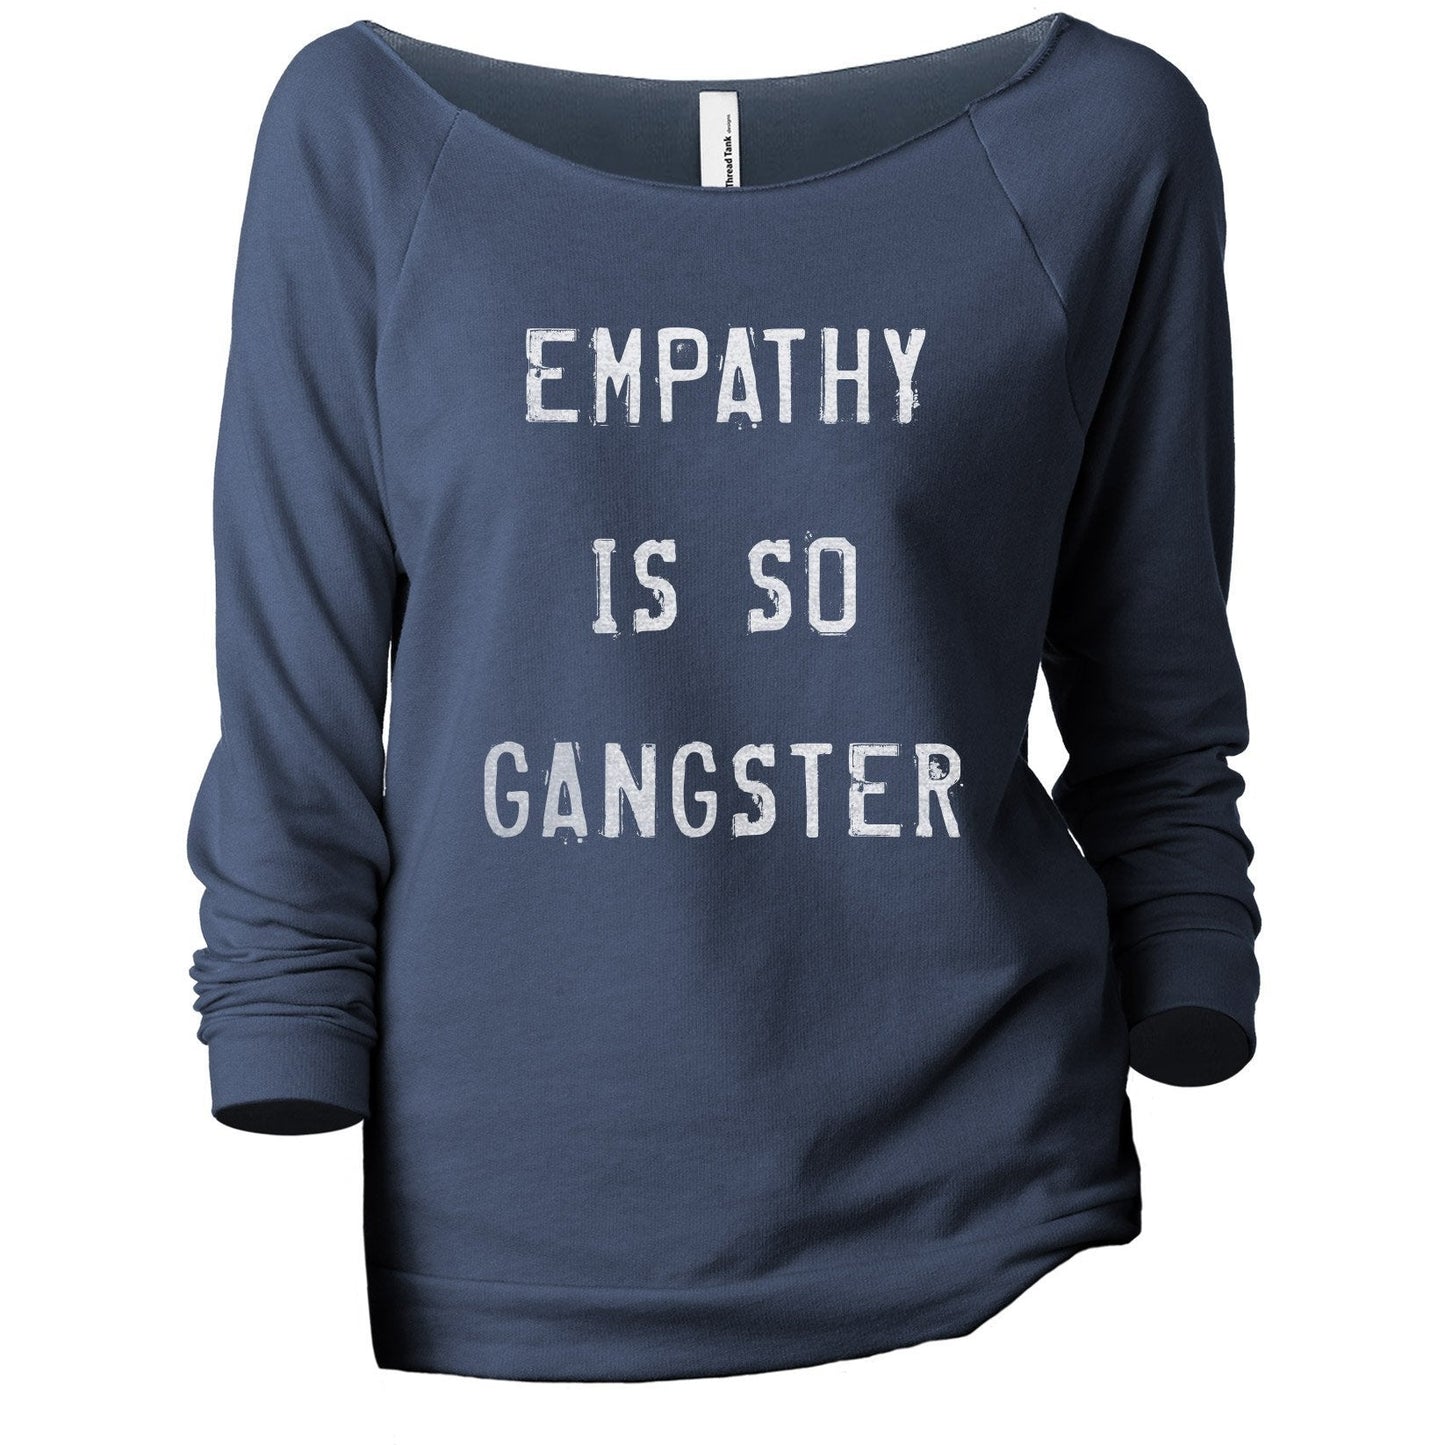 Empathy Is So Gangster Women's Graphic Printed Lightweight Slouchy 3/4 Sleeves Sweatshirt Navy